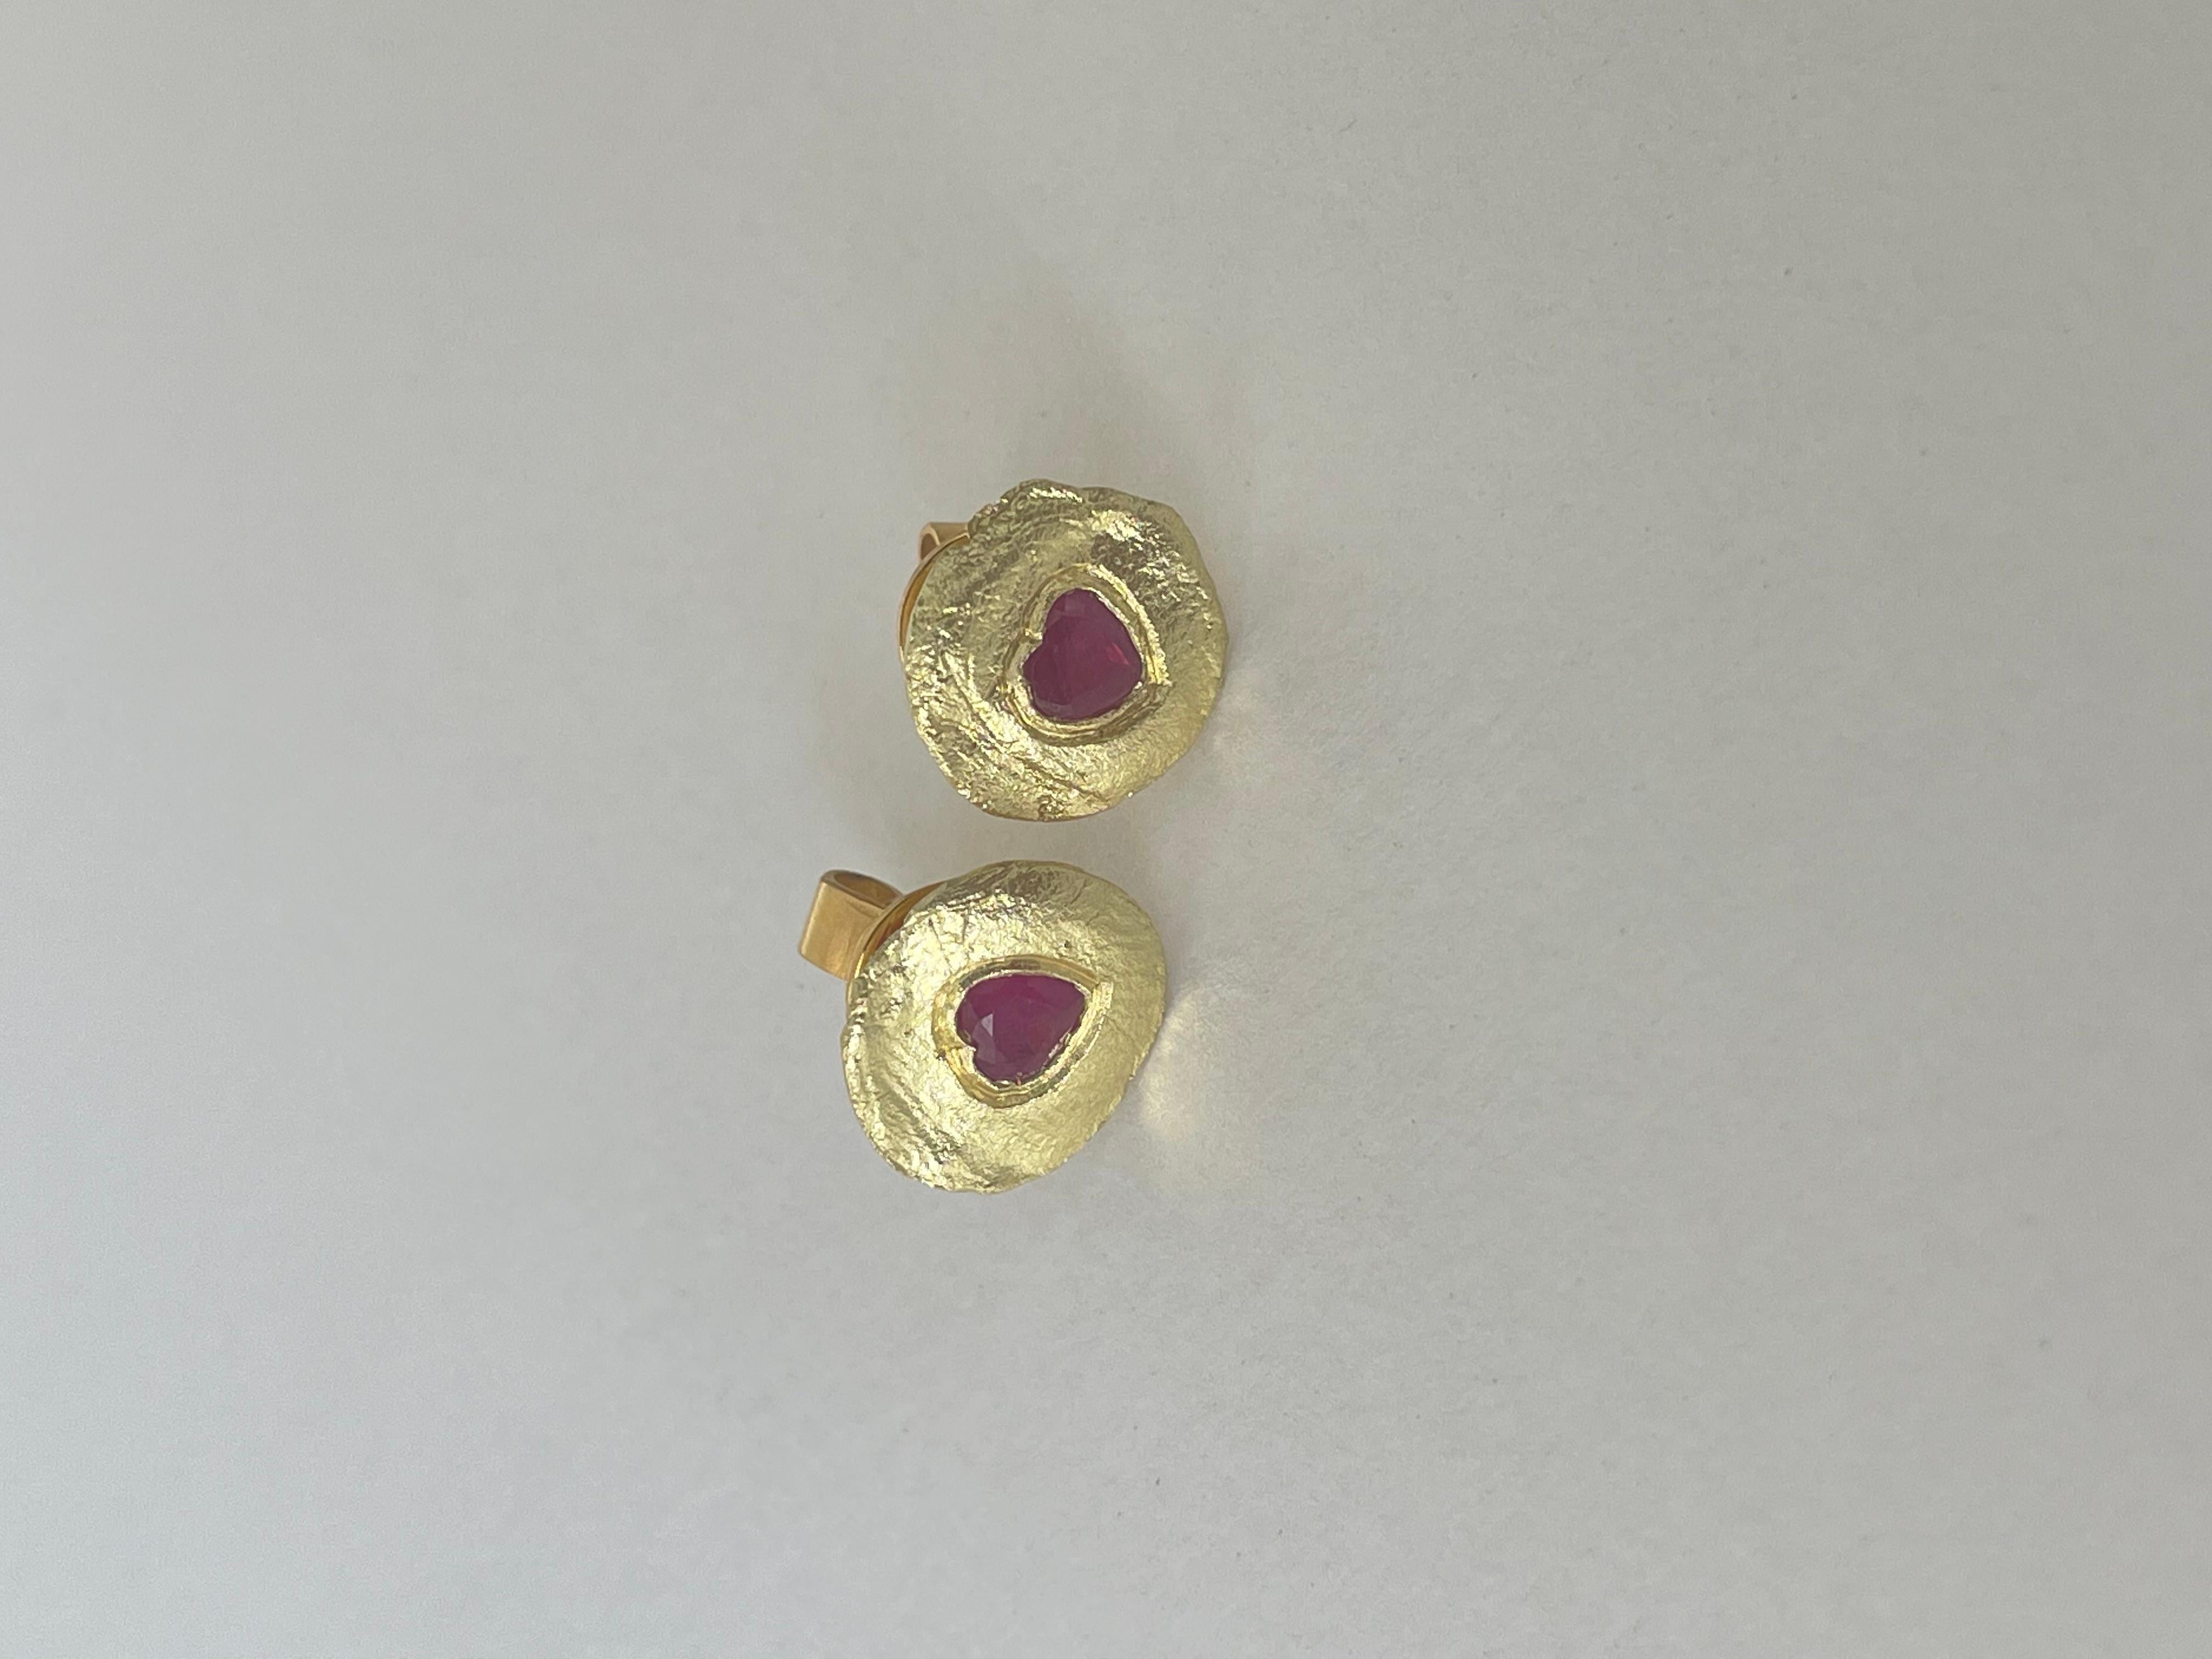 Artist Valentine’s Disc Earrings with 18k gold Ruby stone. For Sale